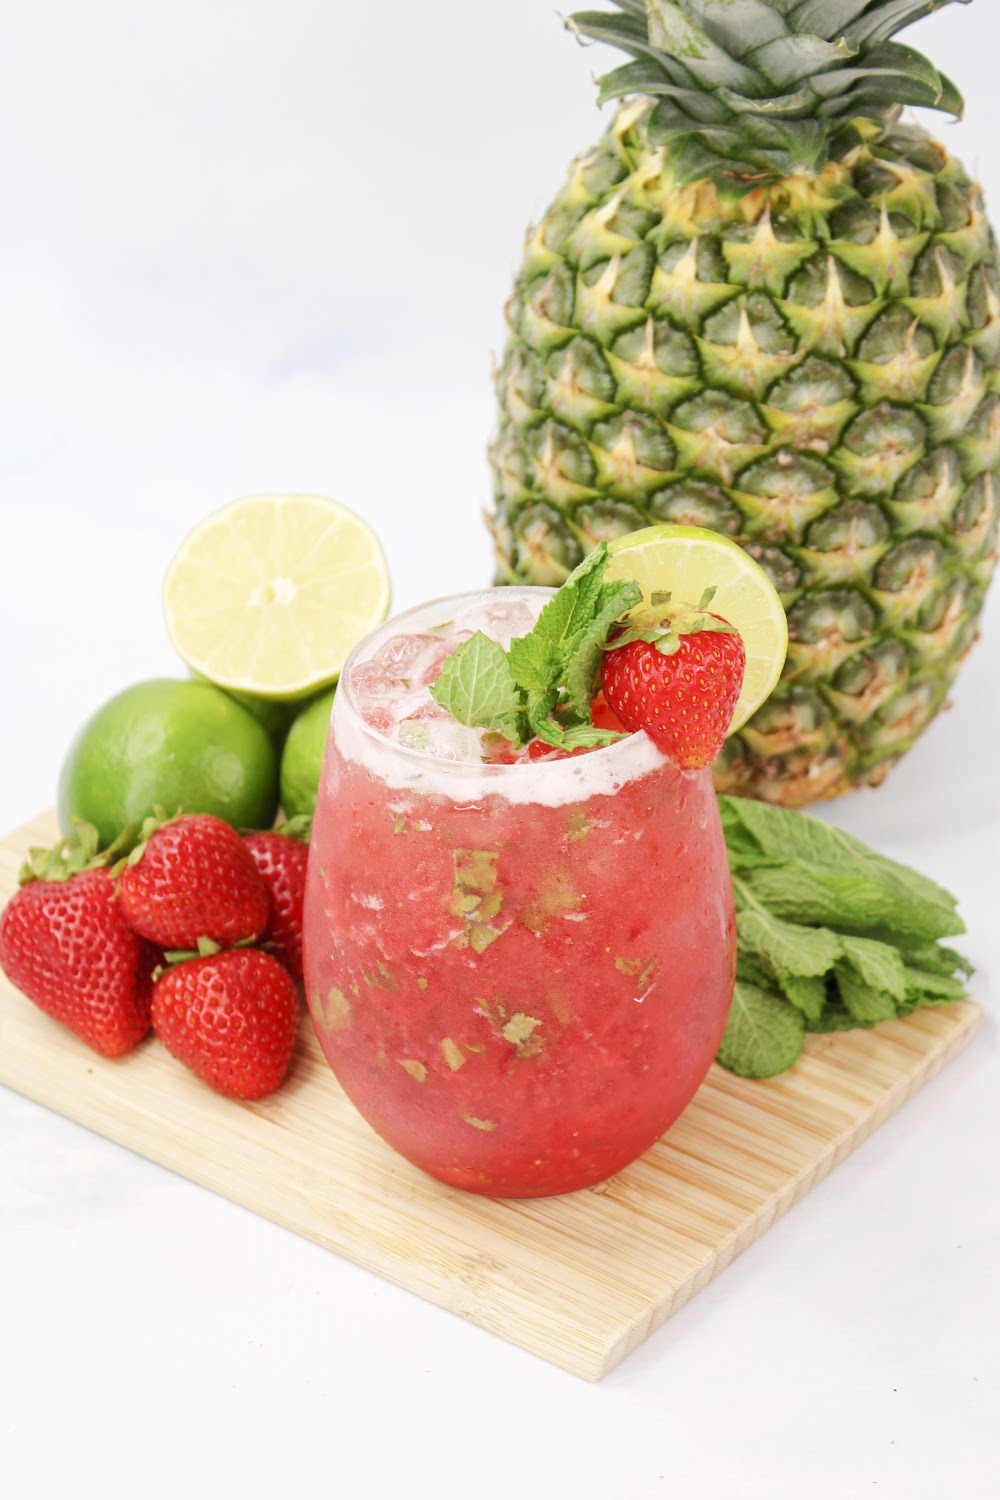 This Strawberry Pineapple Mojito cocktail is garnished with strawberry and mint. It is sitting on a wooden cutting board surrounded by strawberries, limes and a whole pineapple.